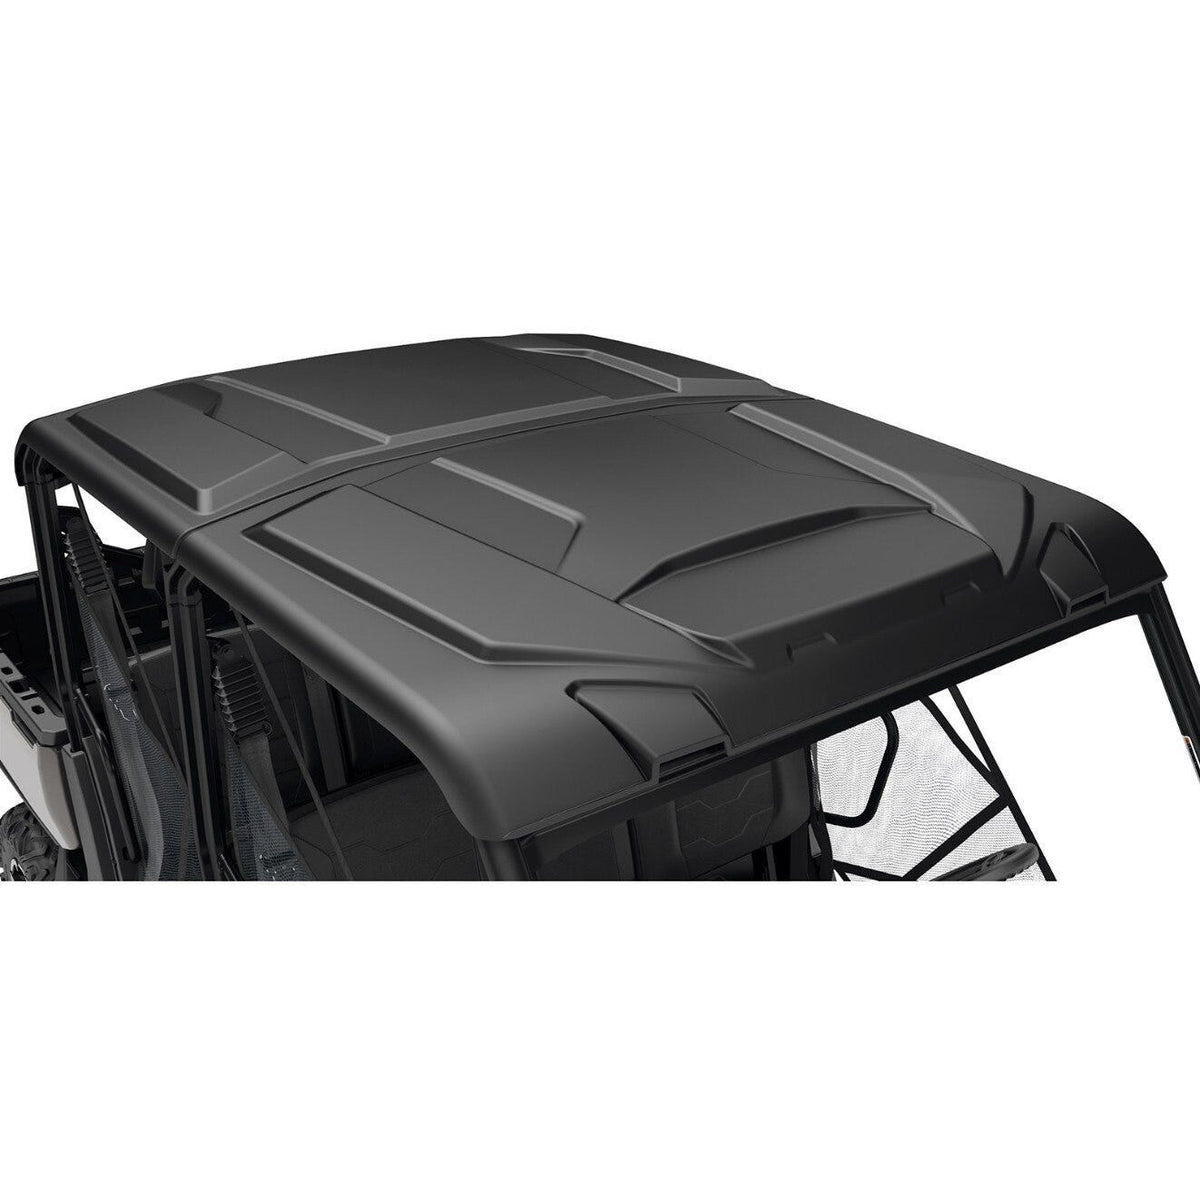 Sport roof - Defender MAX - Propowersports.ca